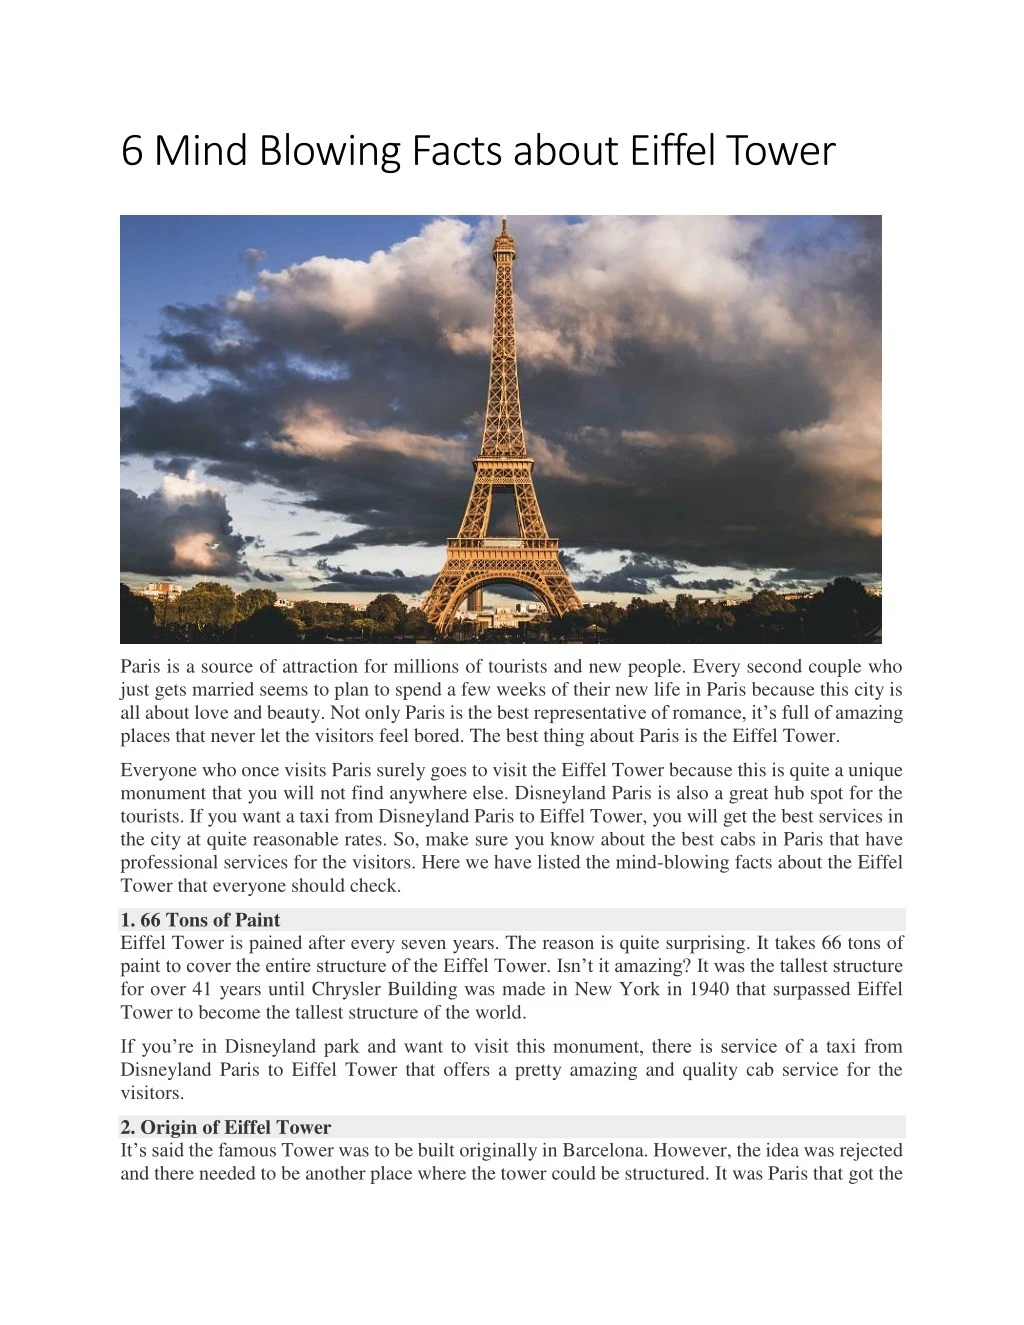 6 mind blowing facts about eiffel tower